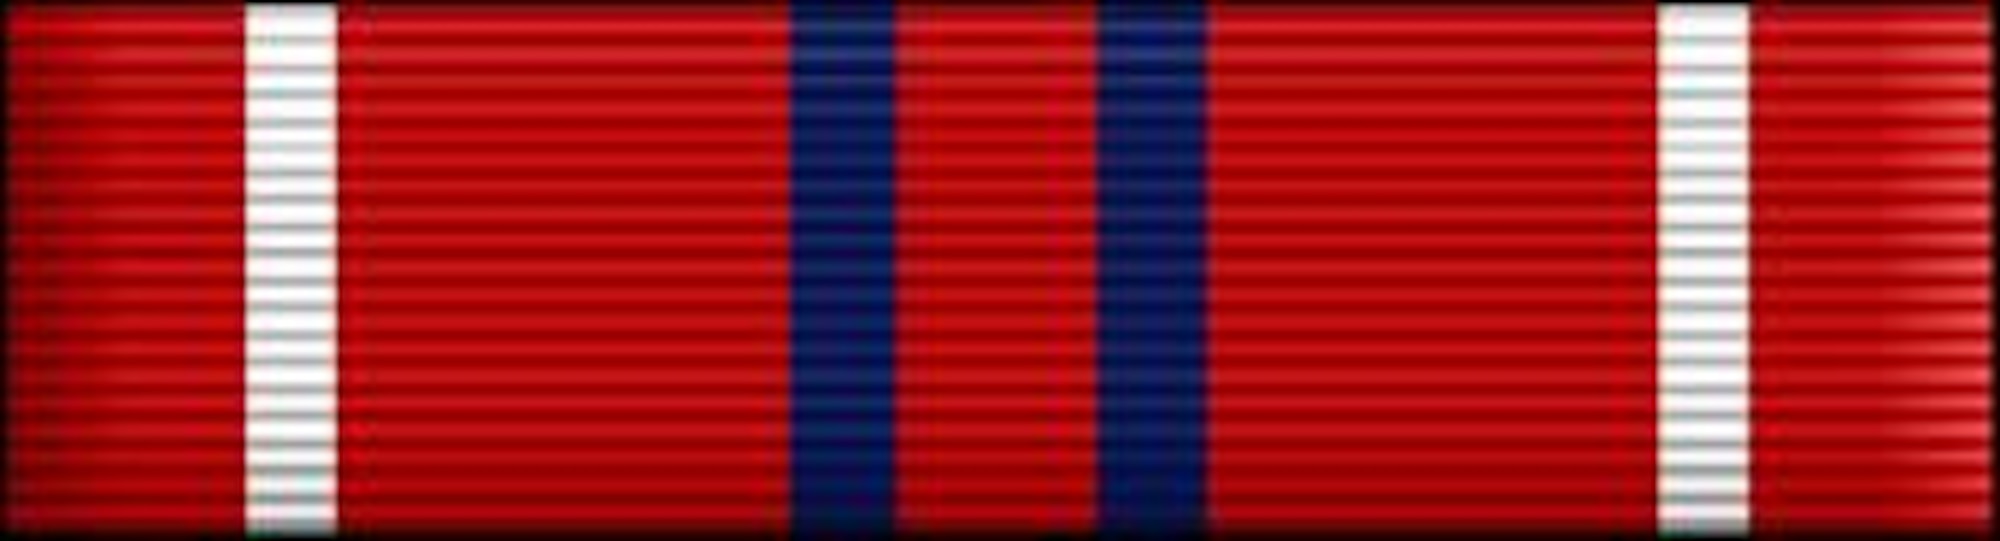 USAF NCO PME Graduate Ribbon, awarded to graduates of the following certified NCO PME schools (NCO Preparatory Course, Airman Leadership School, NCO Leadership School, NCO Academy, SRNCO Academy. Air Force Awards and Decorations (enhance color), U.S. Air Force graphic, AFNEWS/PAND.  The JPG image is a stylized version whereas the EPS version is a two-dimensional line art illustration.